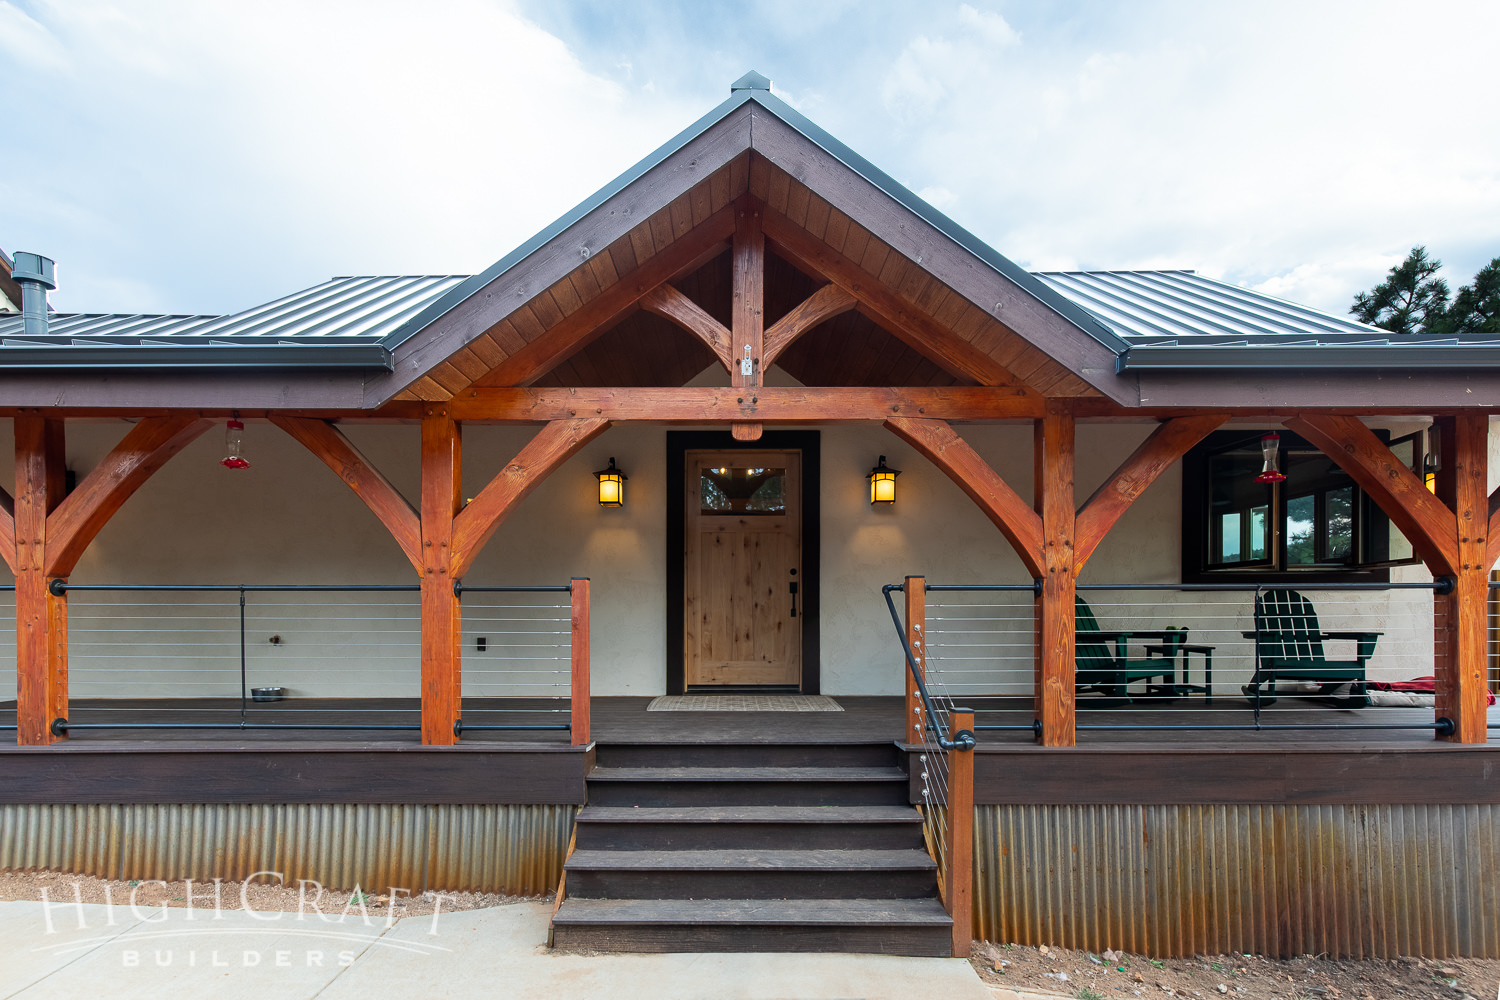 Rustic-Ranch-Addition-Whole-House-Remodel-Timber-Accents-Rusted-Metal-Siding-Exterior